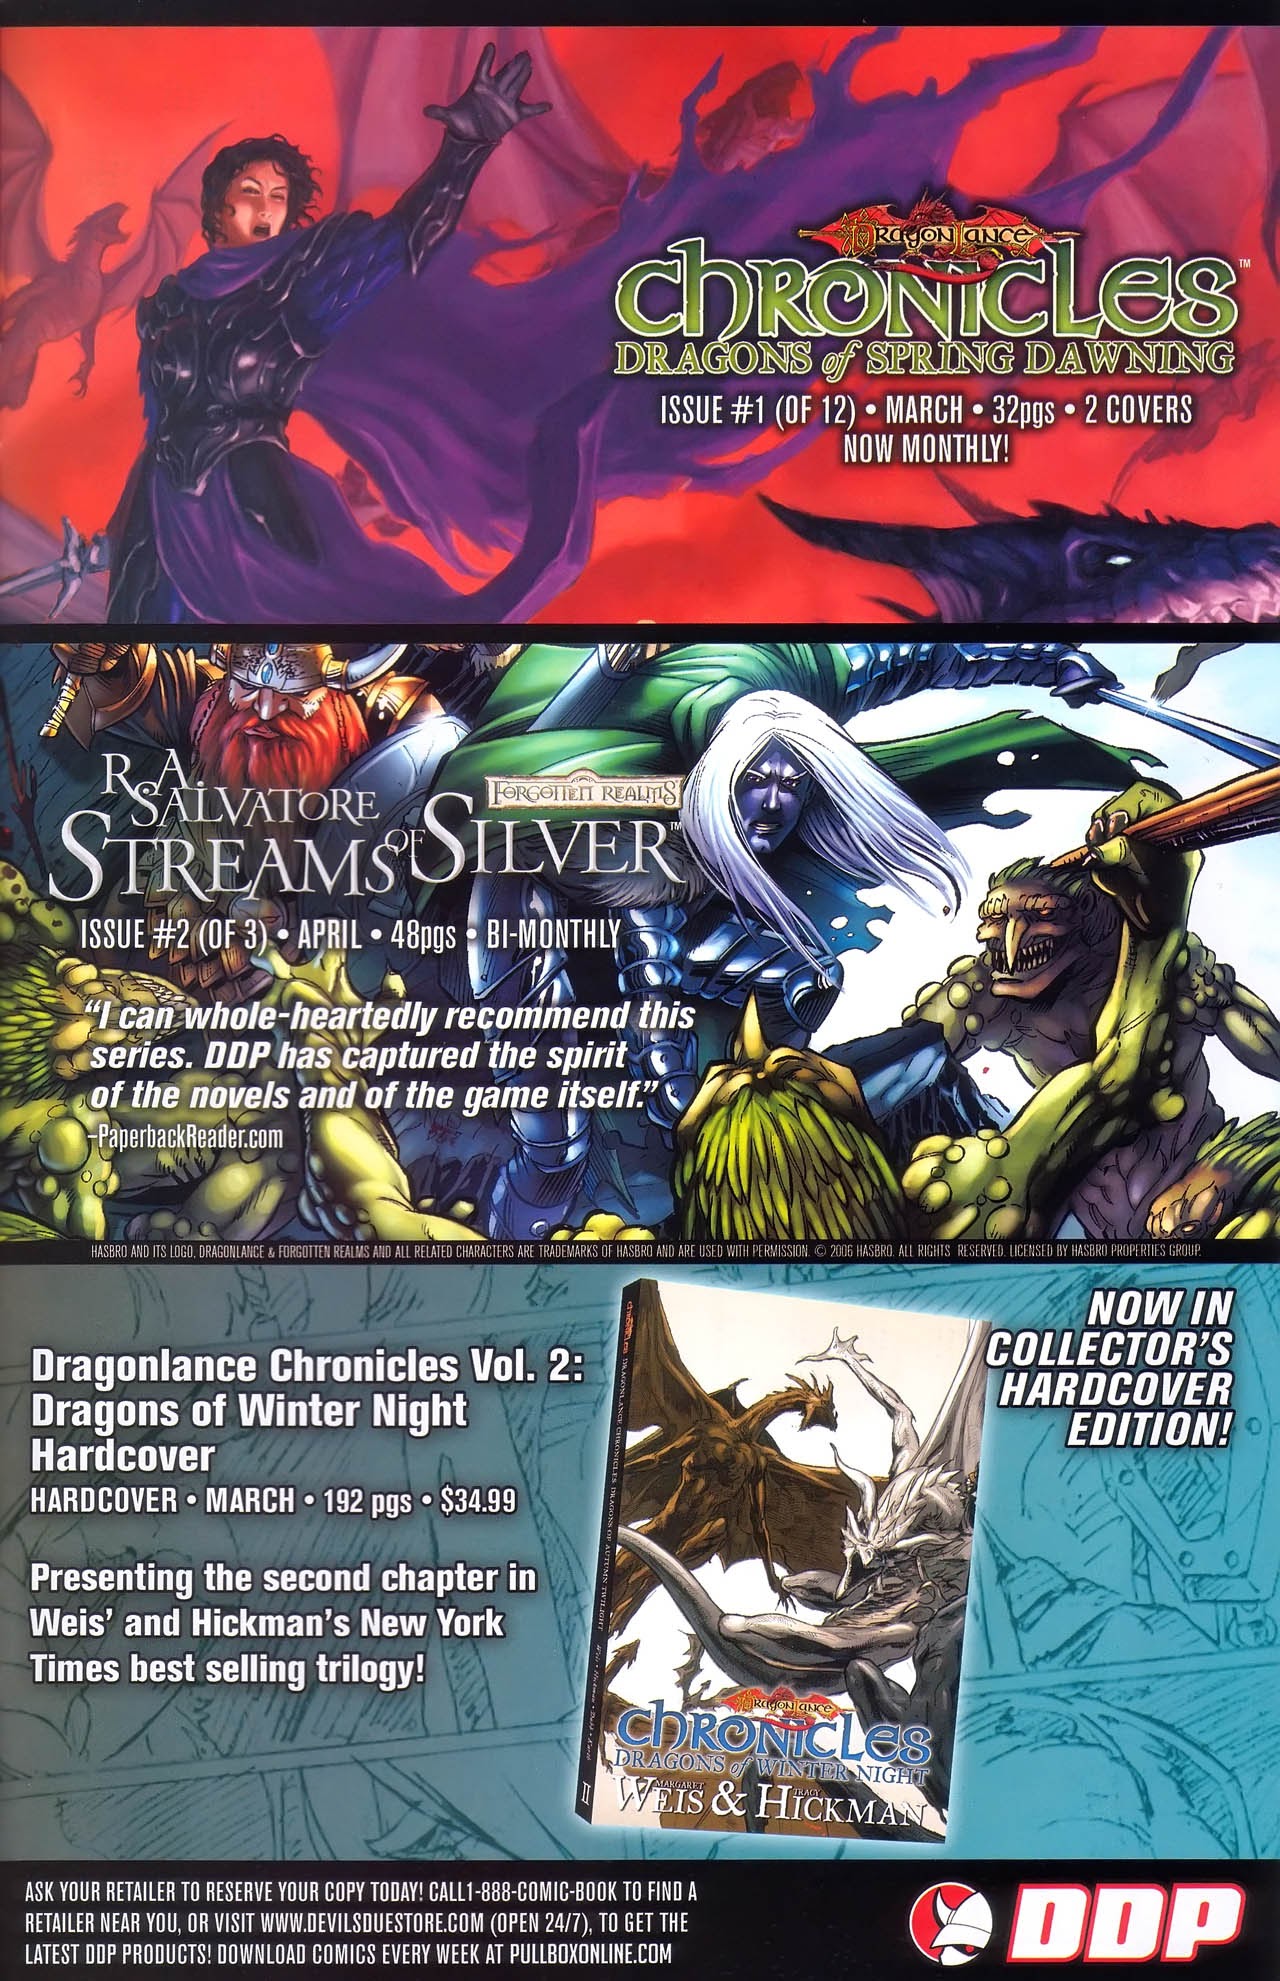 Read online Forgotten Realms: Streams of Silver comic -  Issue #1 - 43